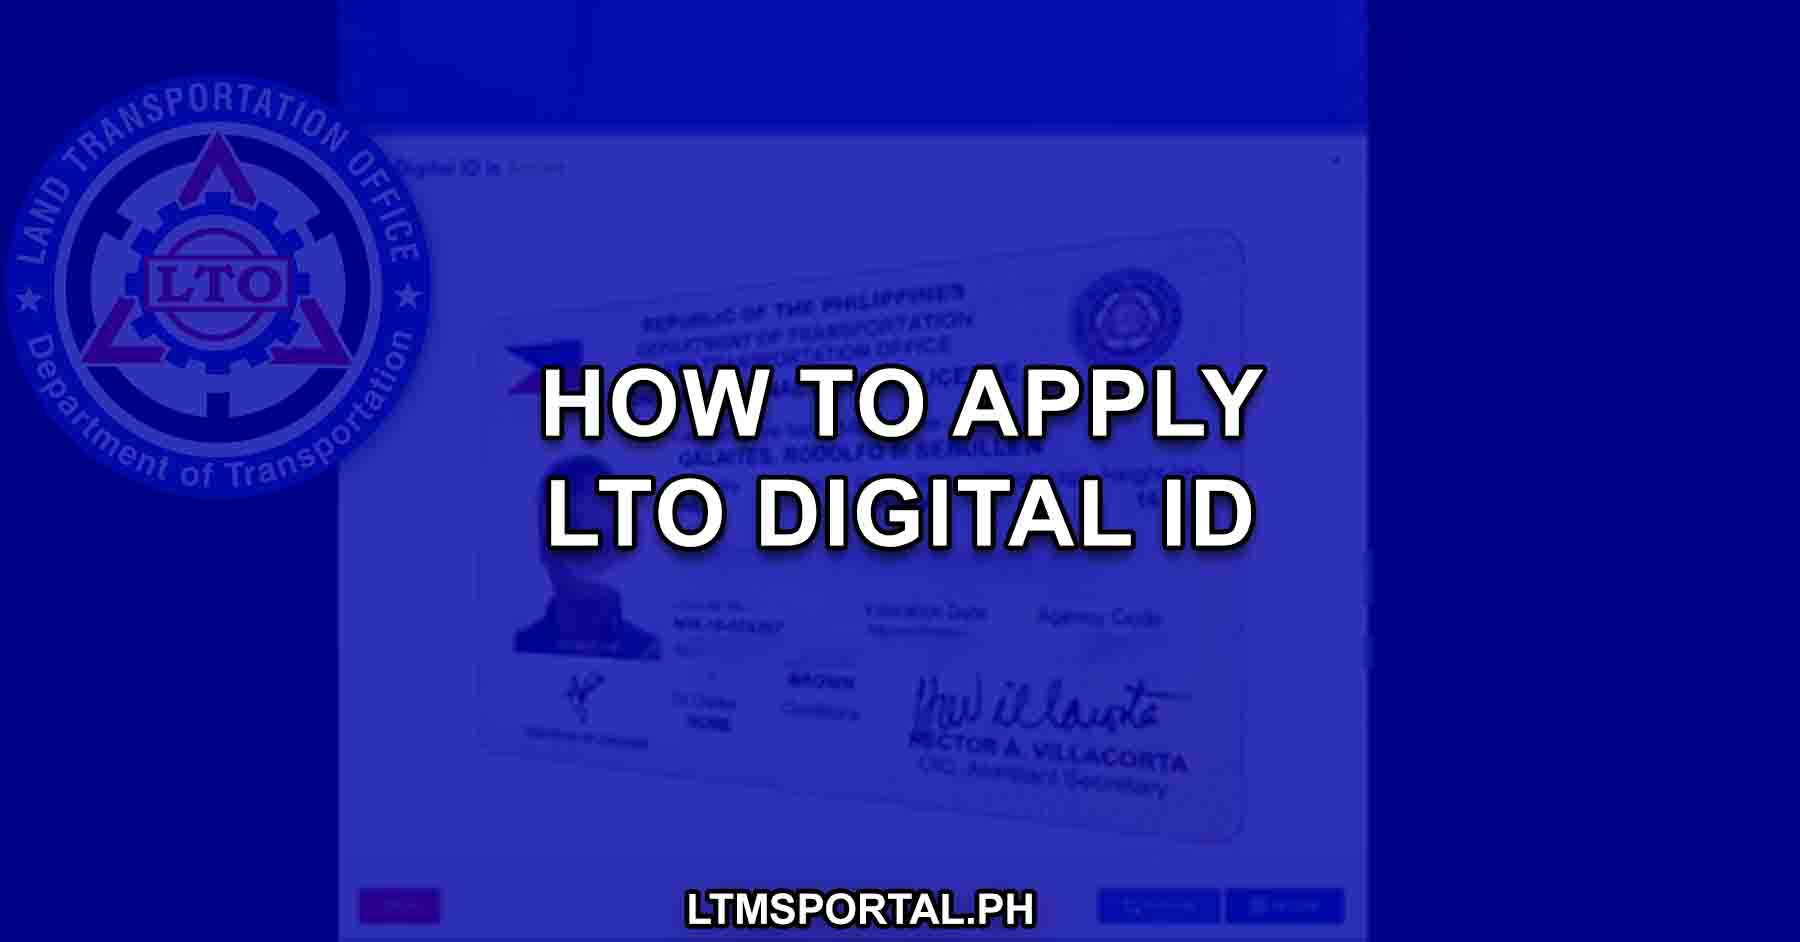 how to apply for an lto digital id online